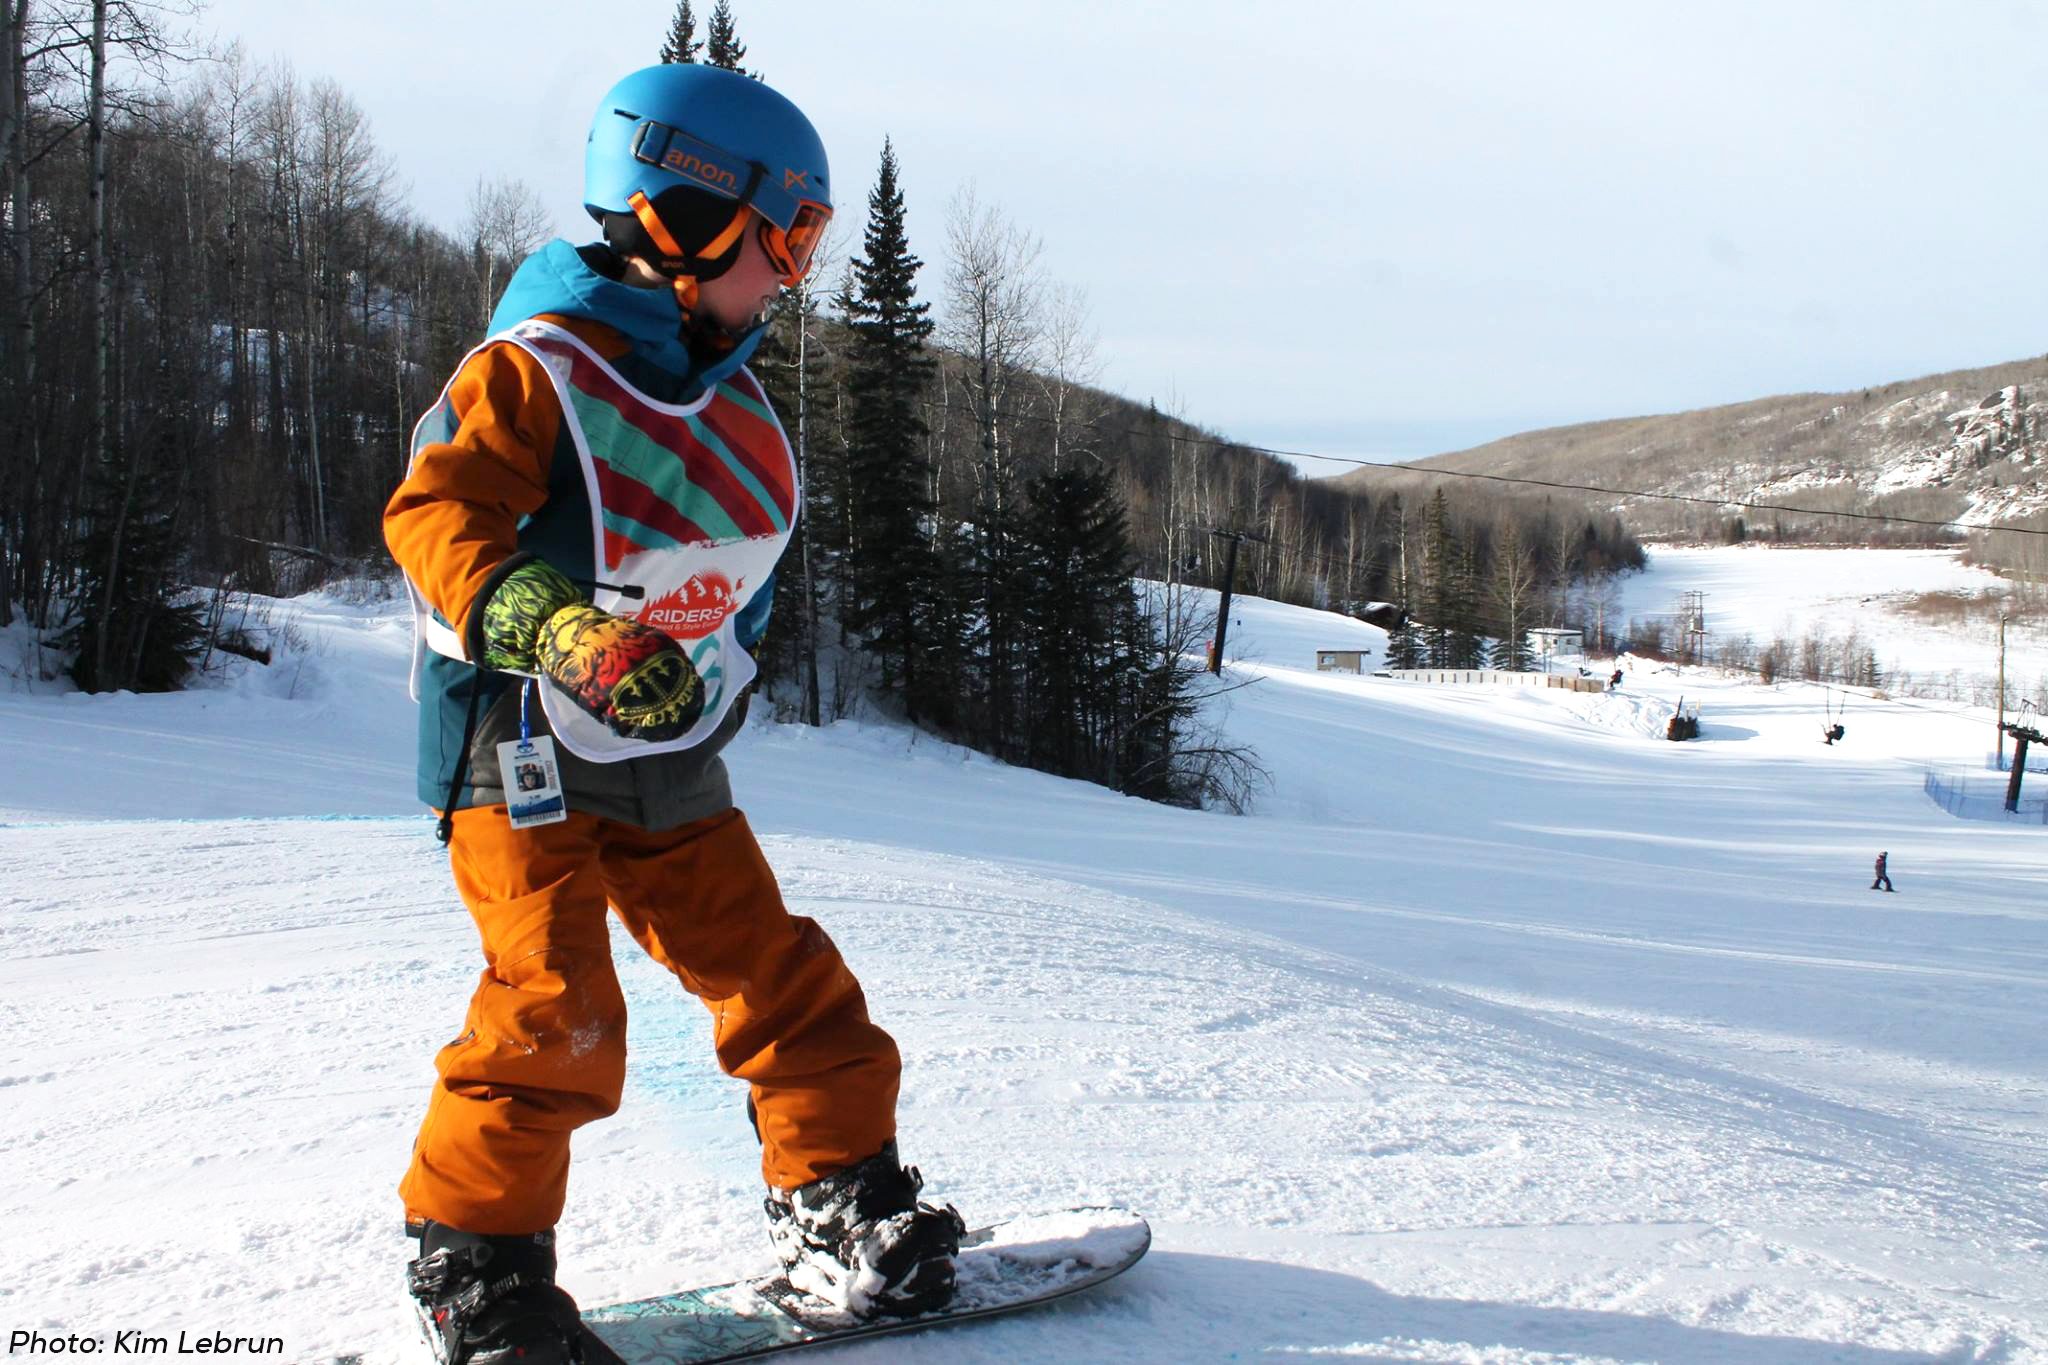 Featured image for “Snowboard Canada RIDER’S Program”